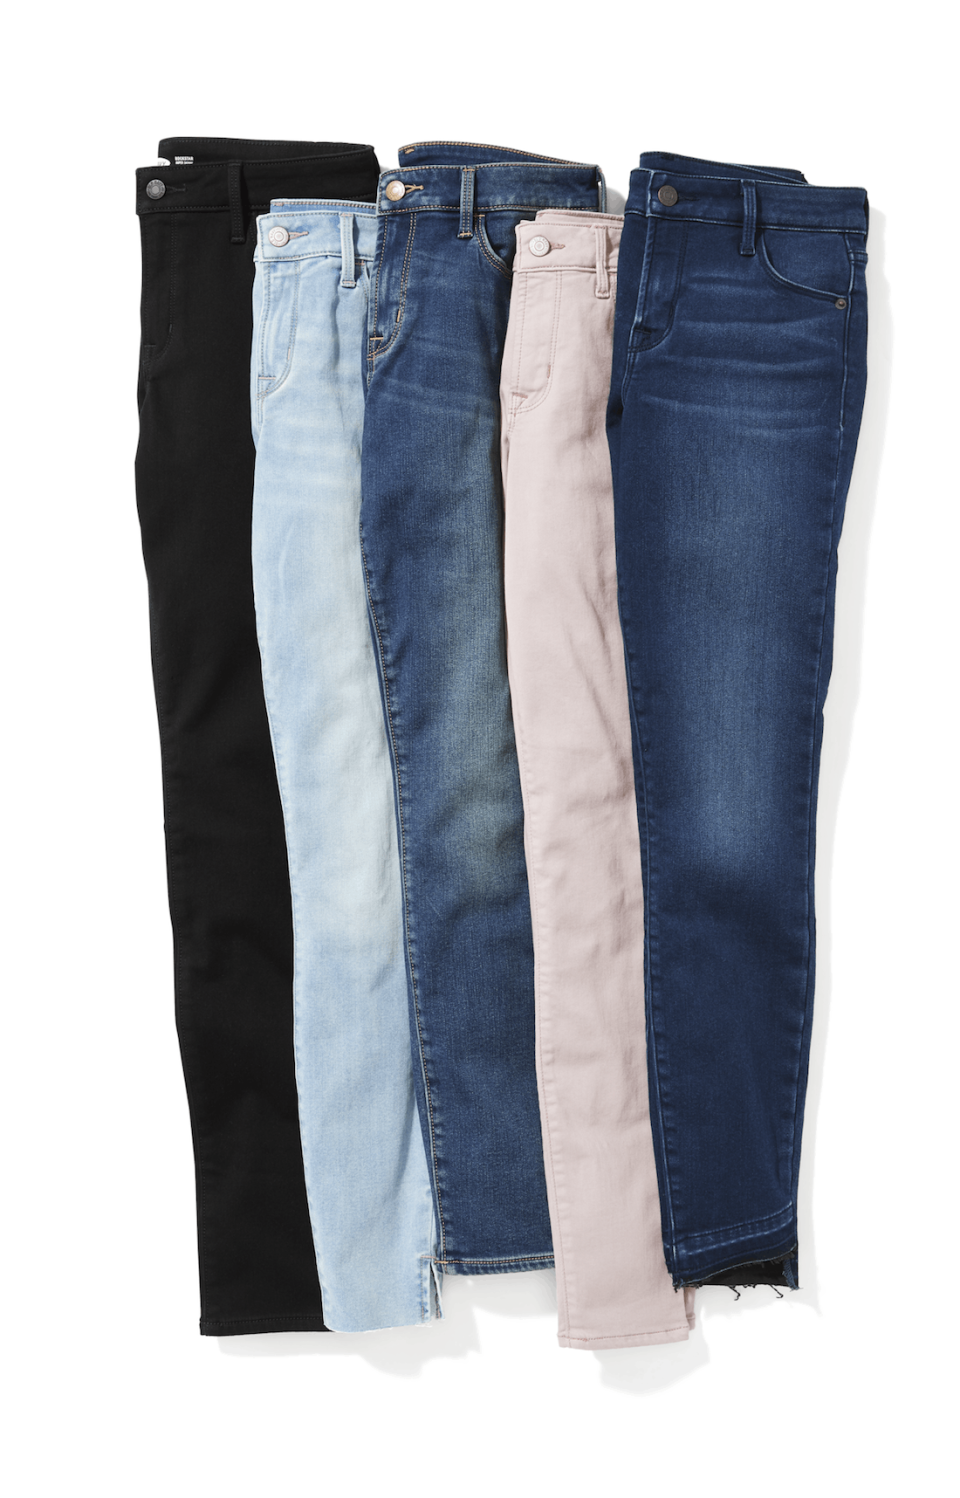 variety of colors blue pink black in Old Navy Built-In Warm jeans